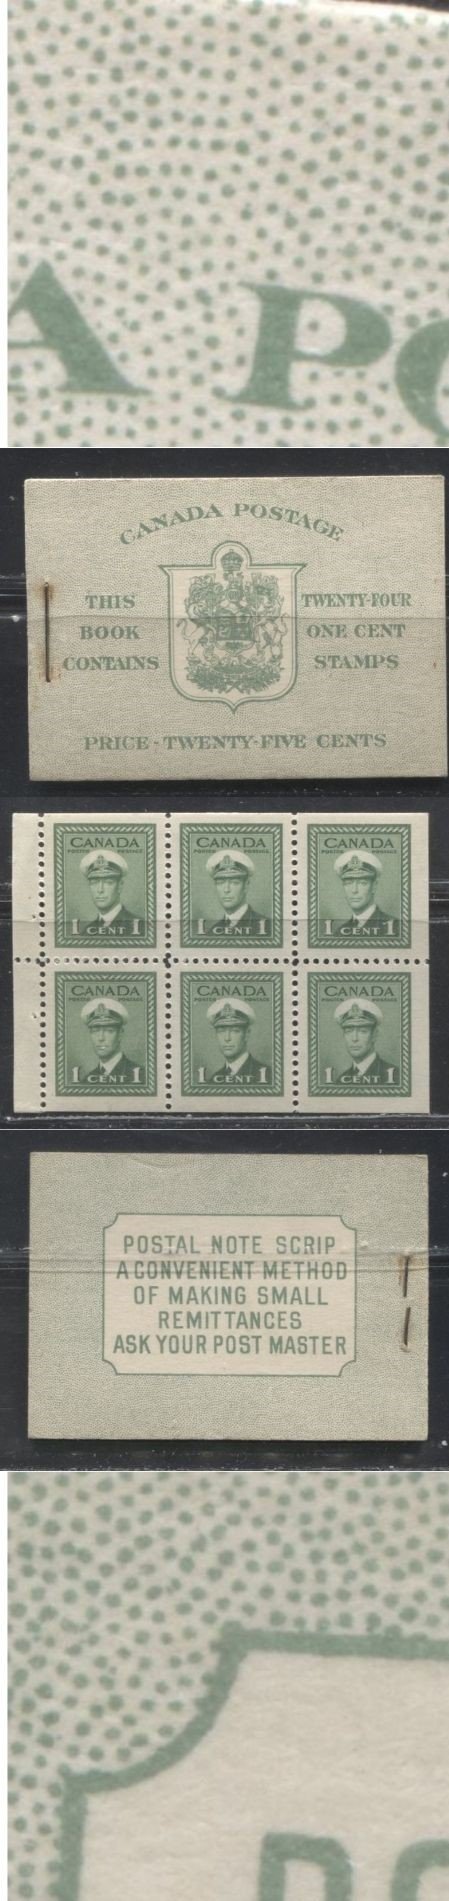 Lot 245 Canada #BK32f 1942-1949 War Issue, Complete 25¢ English Booklet, 4 Panes of 1c Green,  Ribbed Vertical Wove Paper, Harris Front Cover Type IIa, Back Cover Type Cbii, 7c & 6c Airmail Rates Page